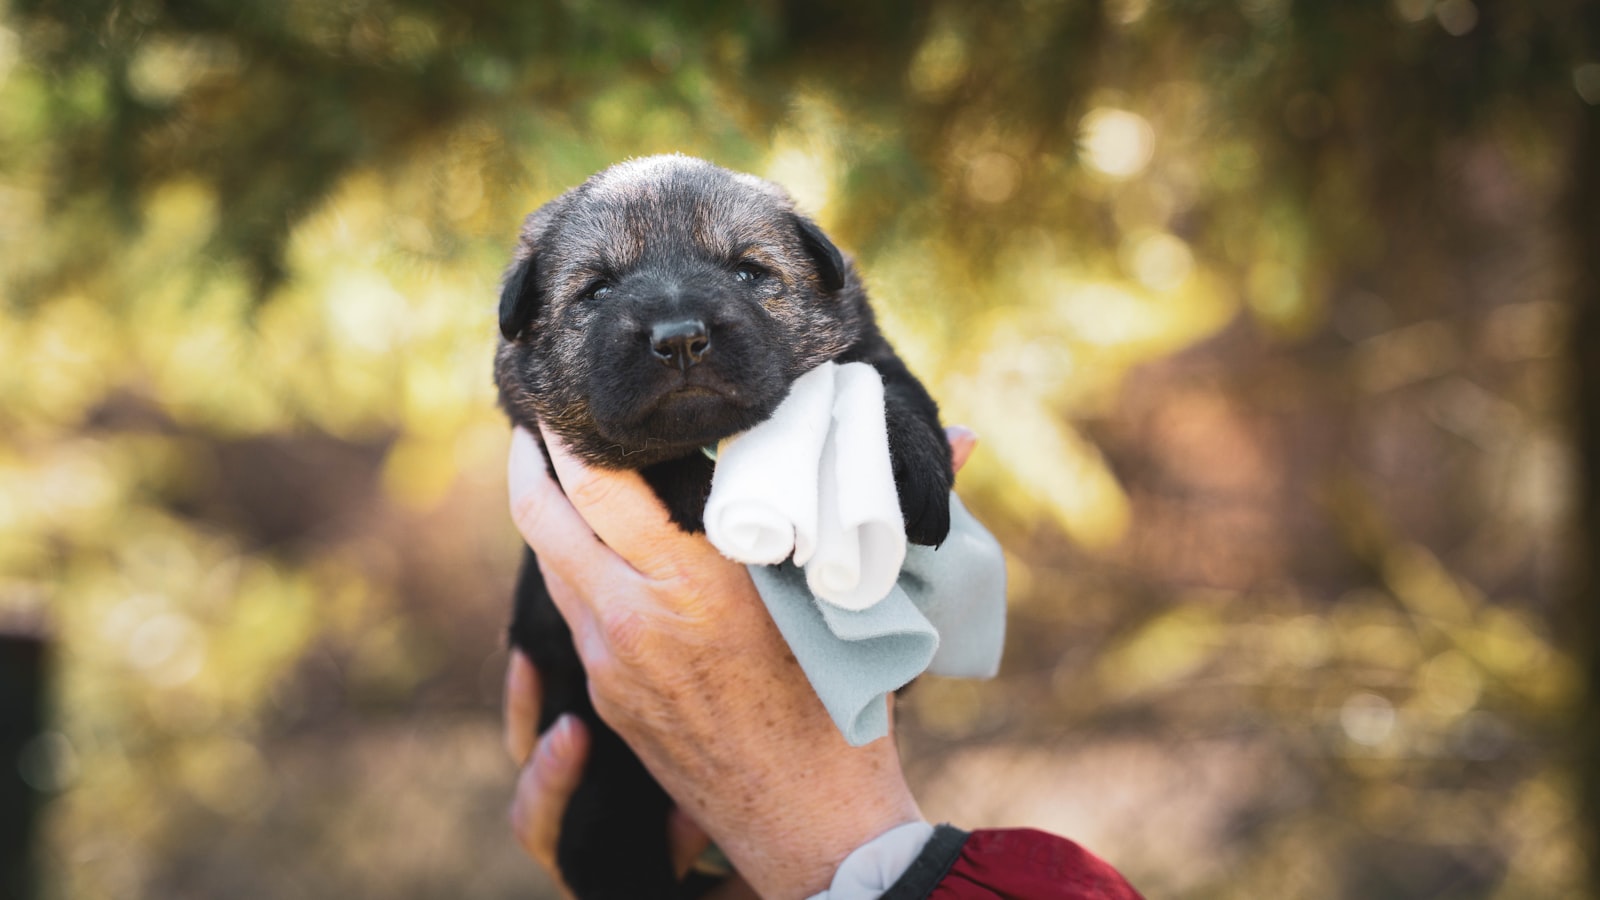 Sony a6000 + Sigma 56mm F1.4 DC DN | C sample photo. Black short coated puppy photography